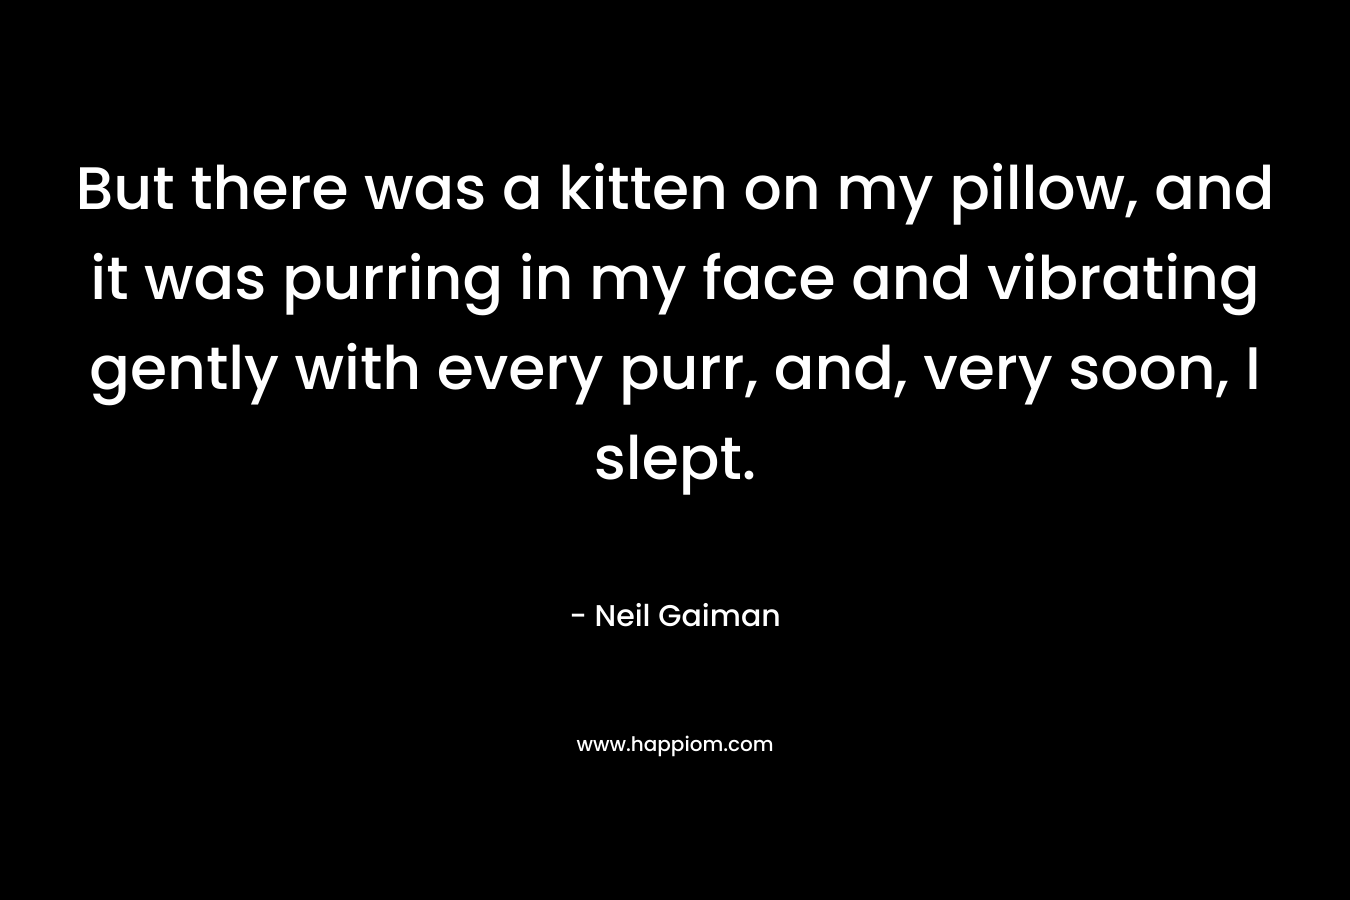 But there was a kitten on my pillow, and it was purring in my face and vibrating gently with every purr, and, very soon, I slept.